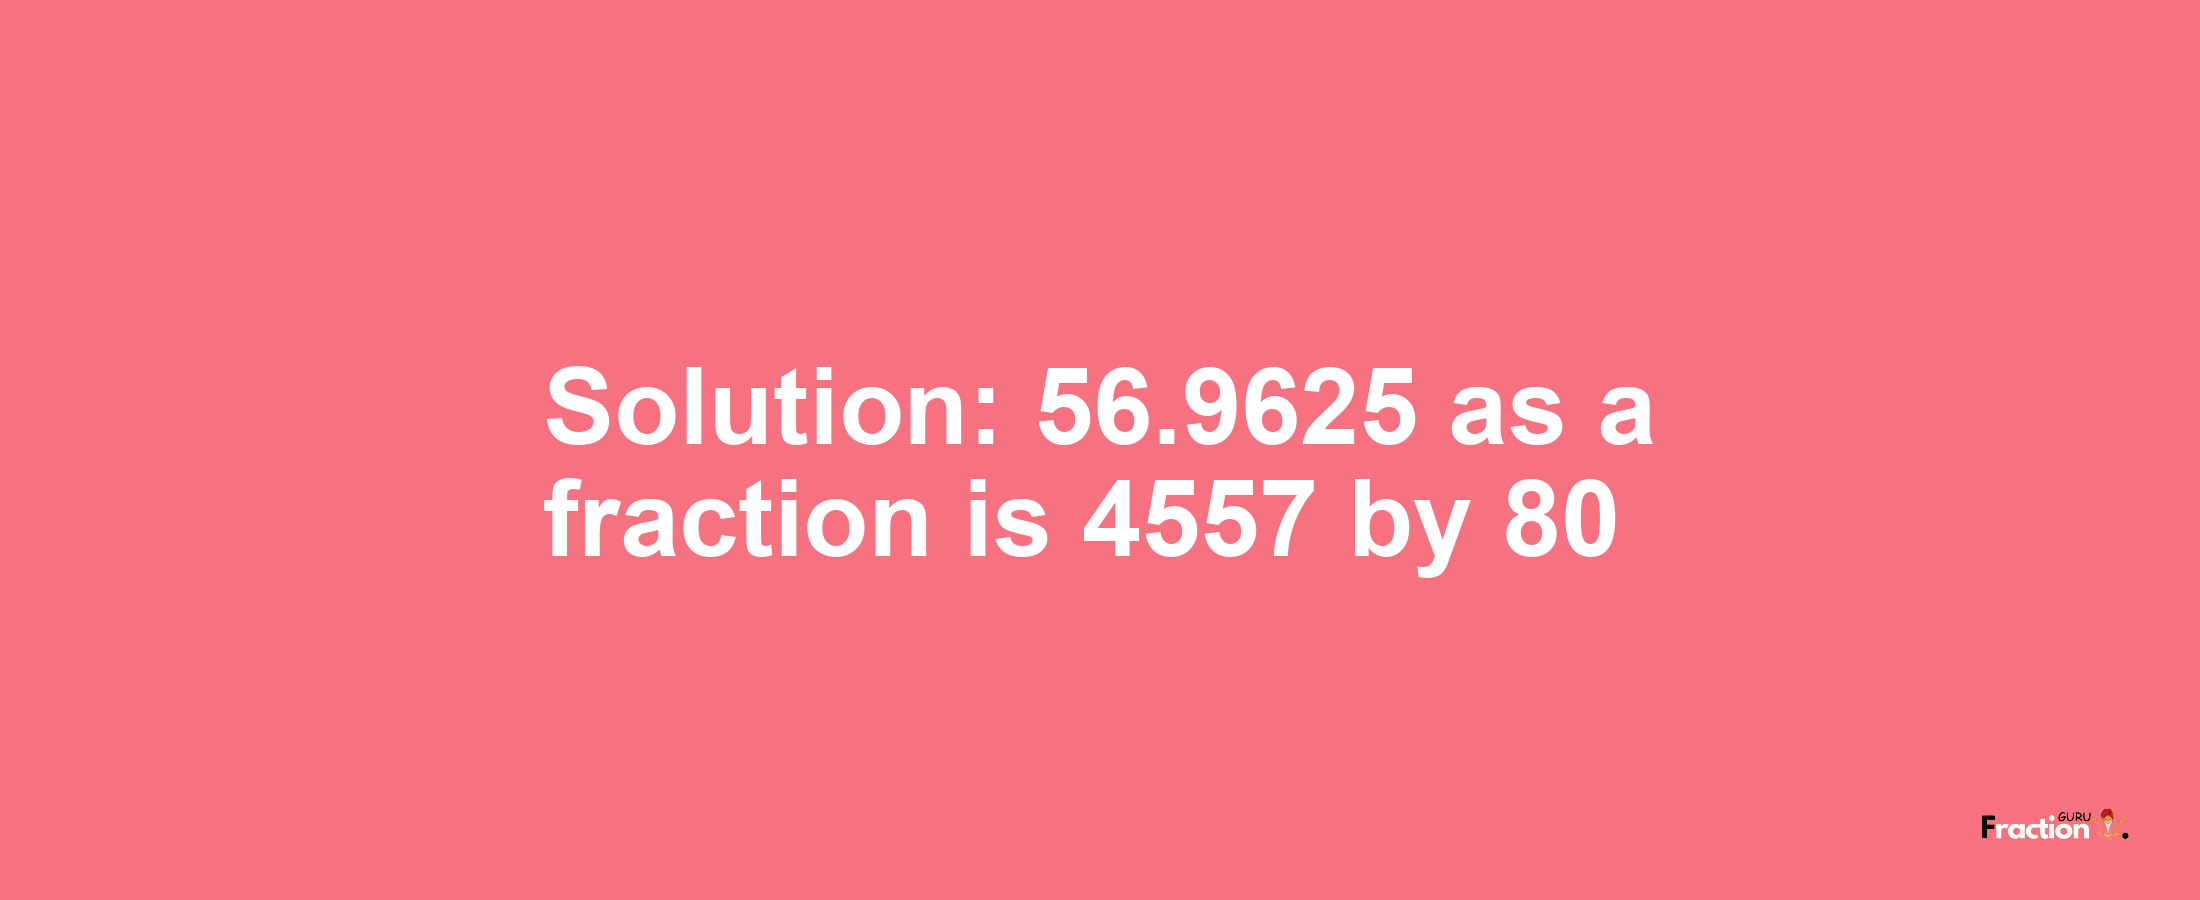 Solution:56.9625 as a fraction is 4557/80